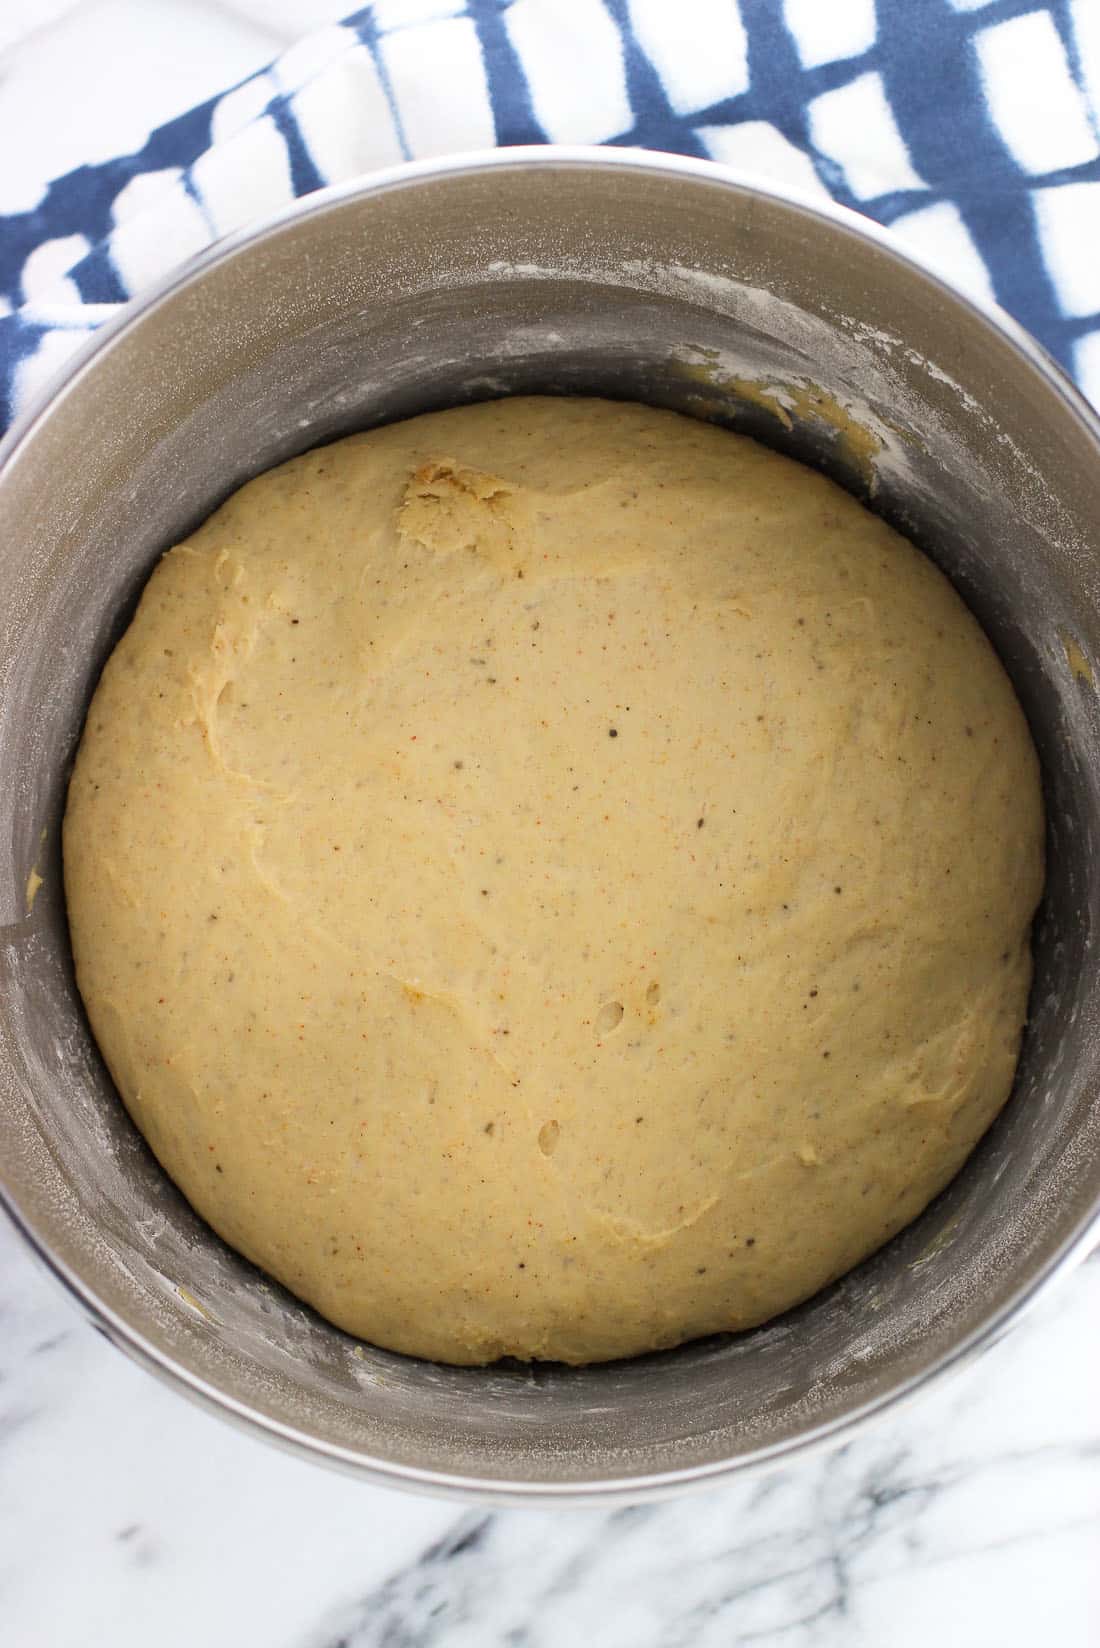 An overhead picture of the risen dough in a metal stand mixer bowl